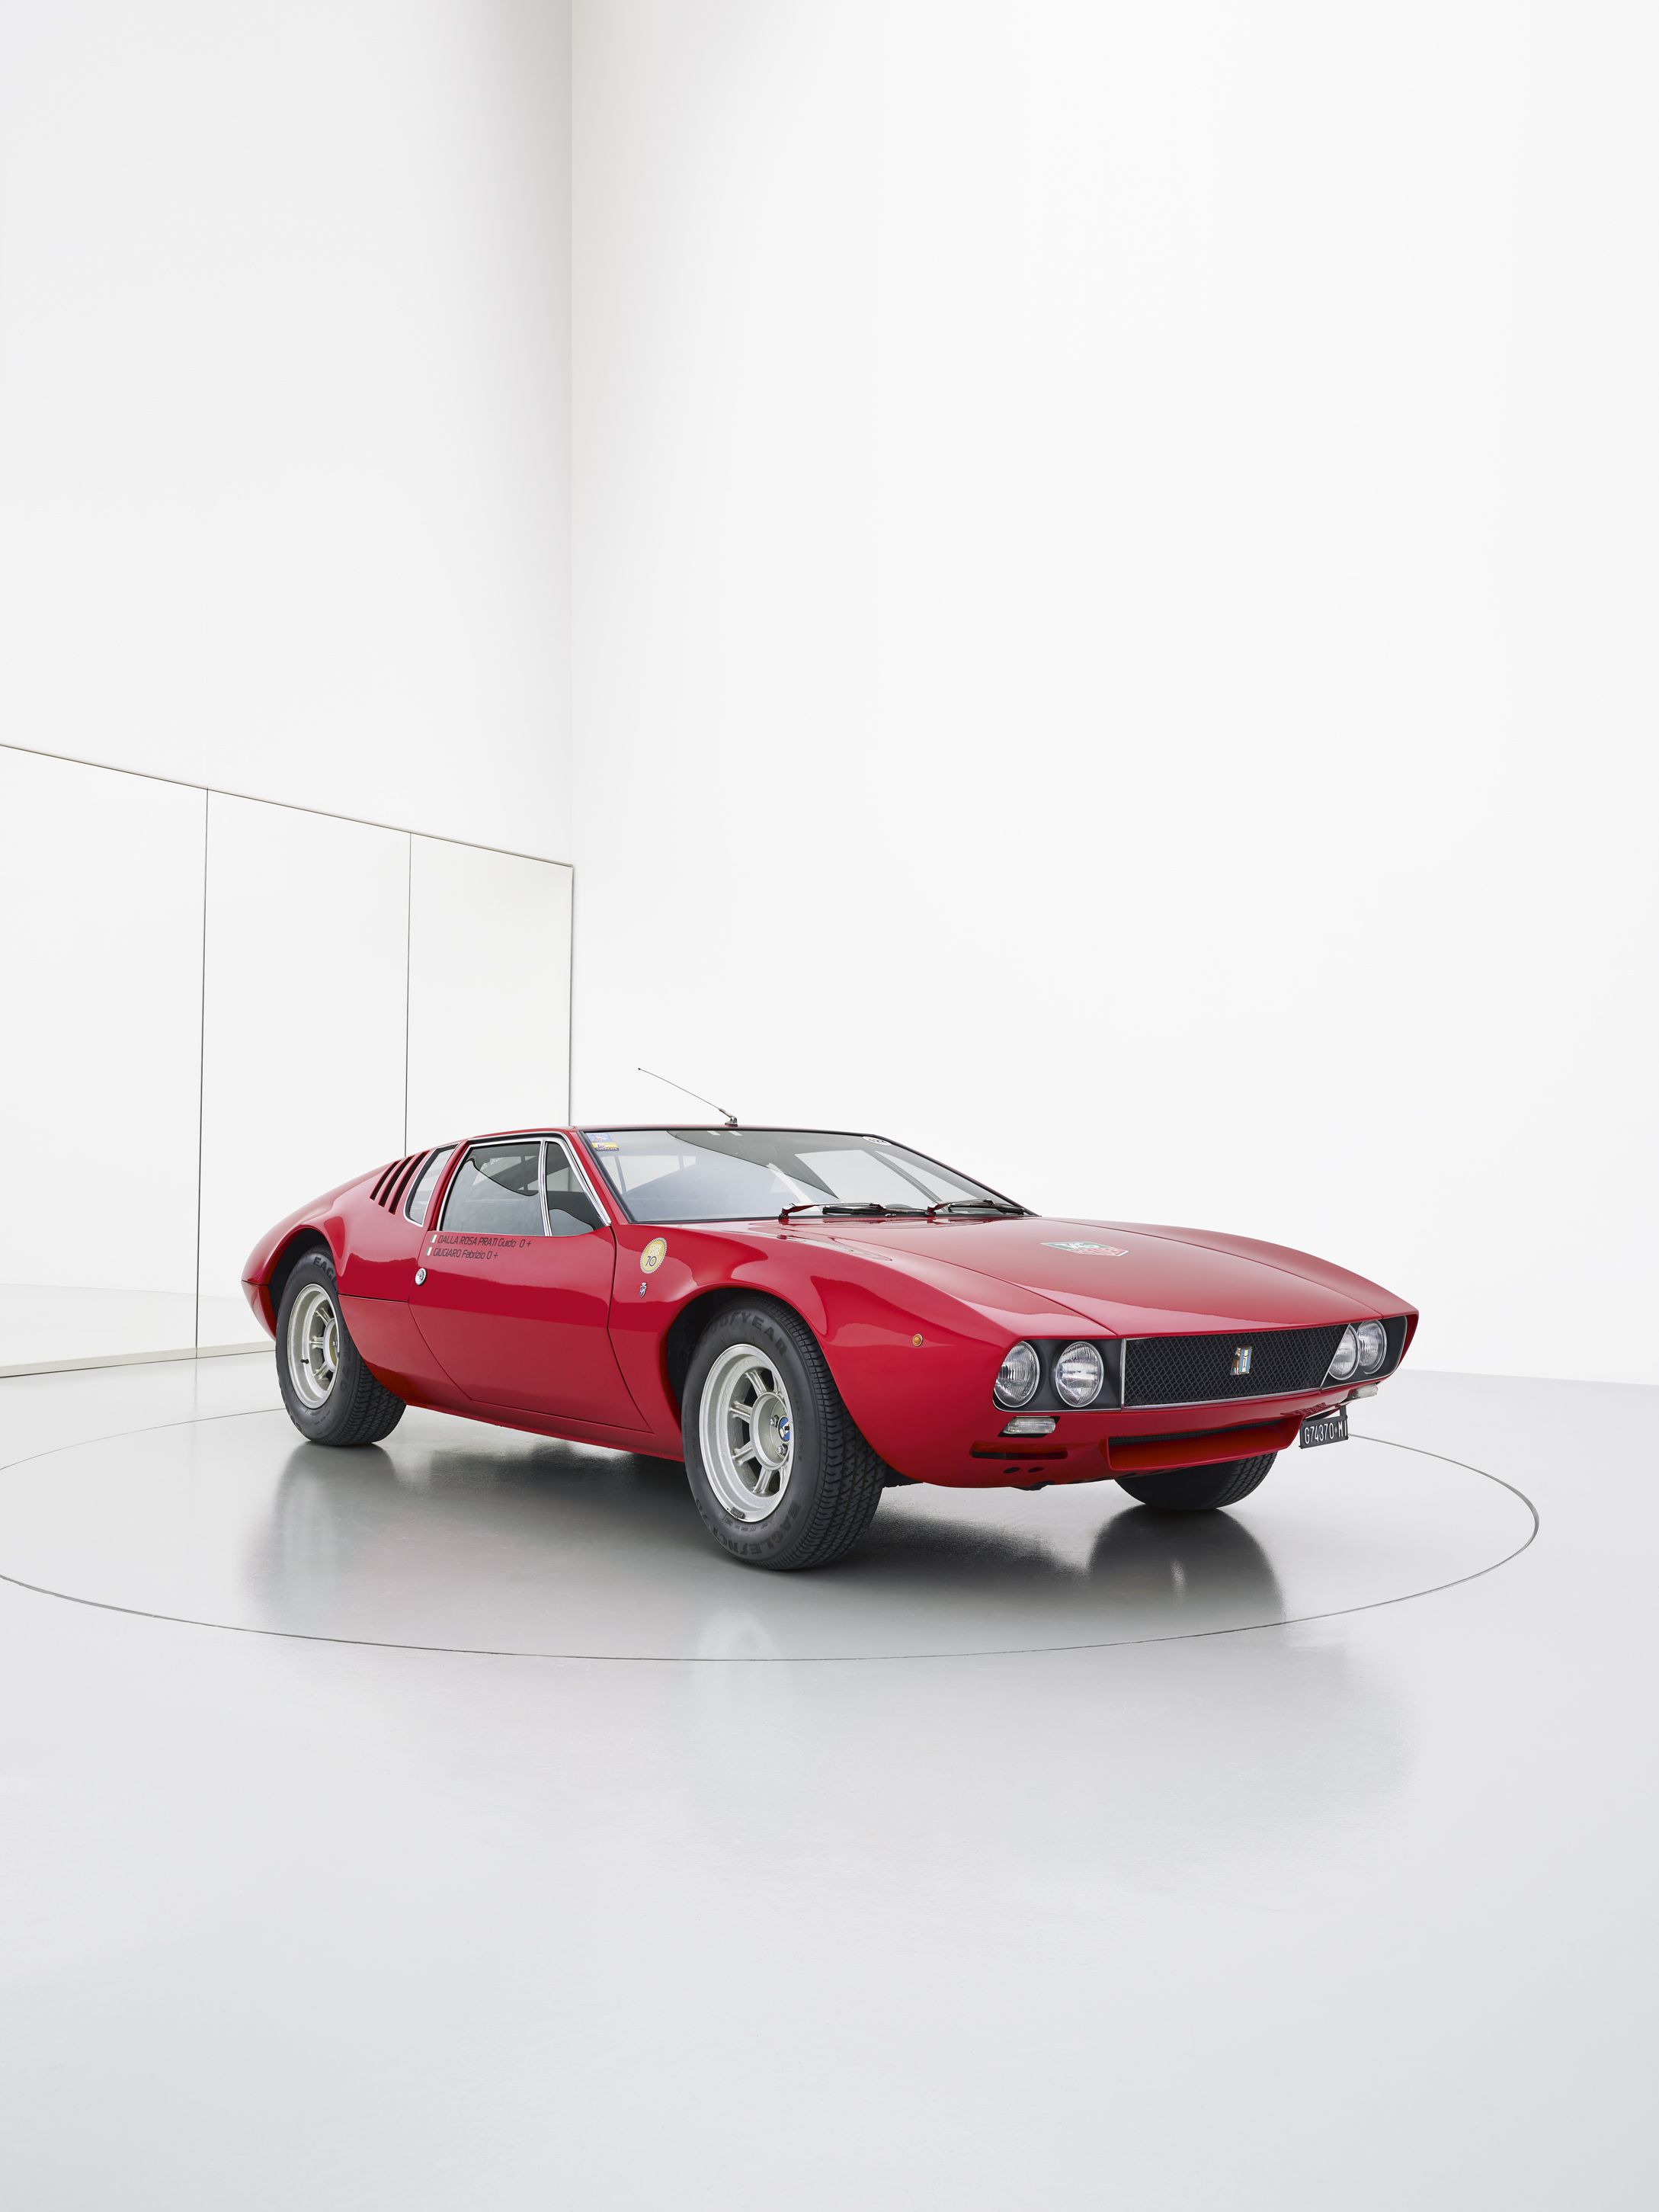 How Giorgetto Giugiaro Became The Greatest Car Designer Of All Time